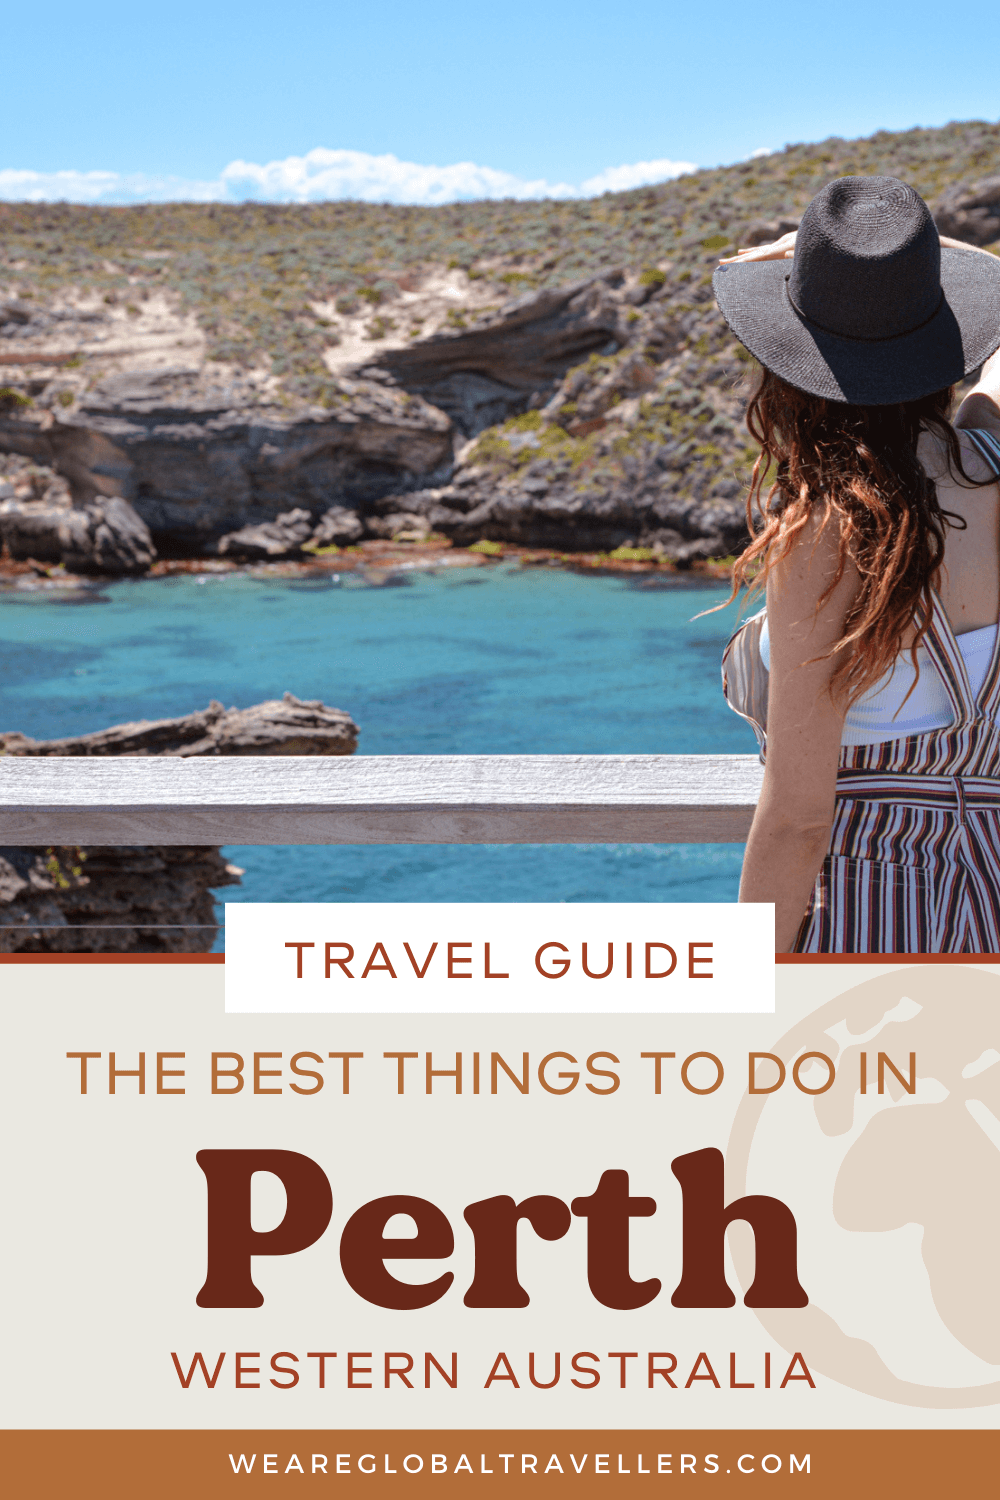 The best things to do in Perth, Western Australia